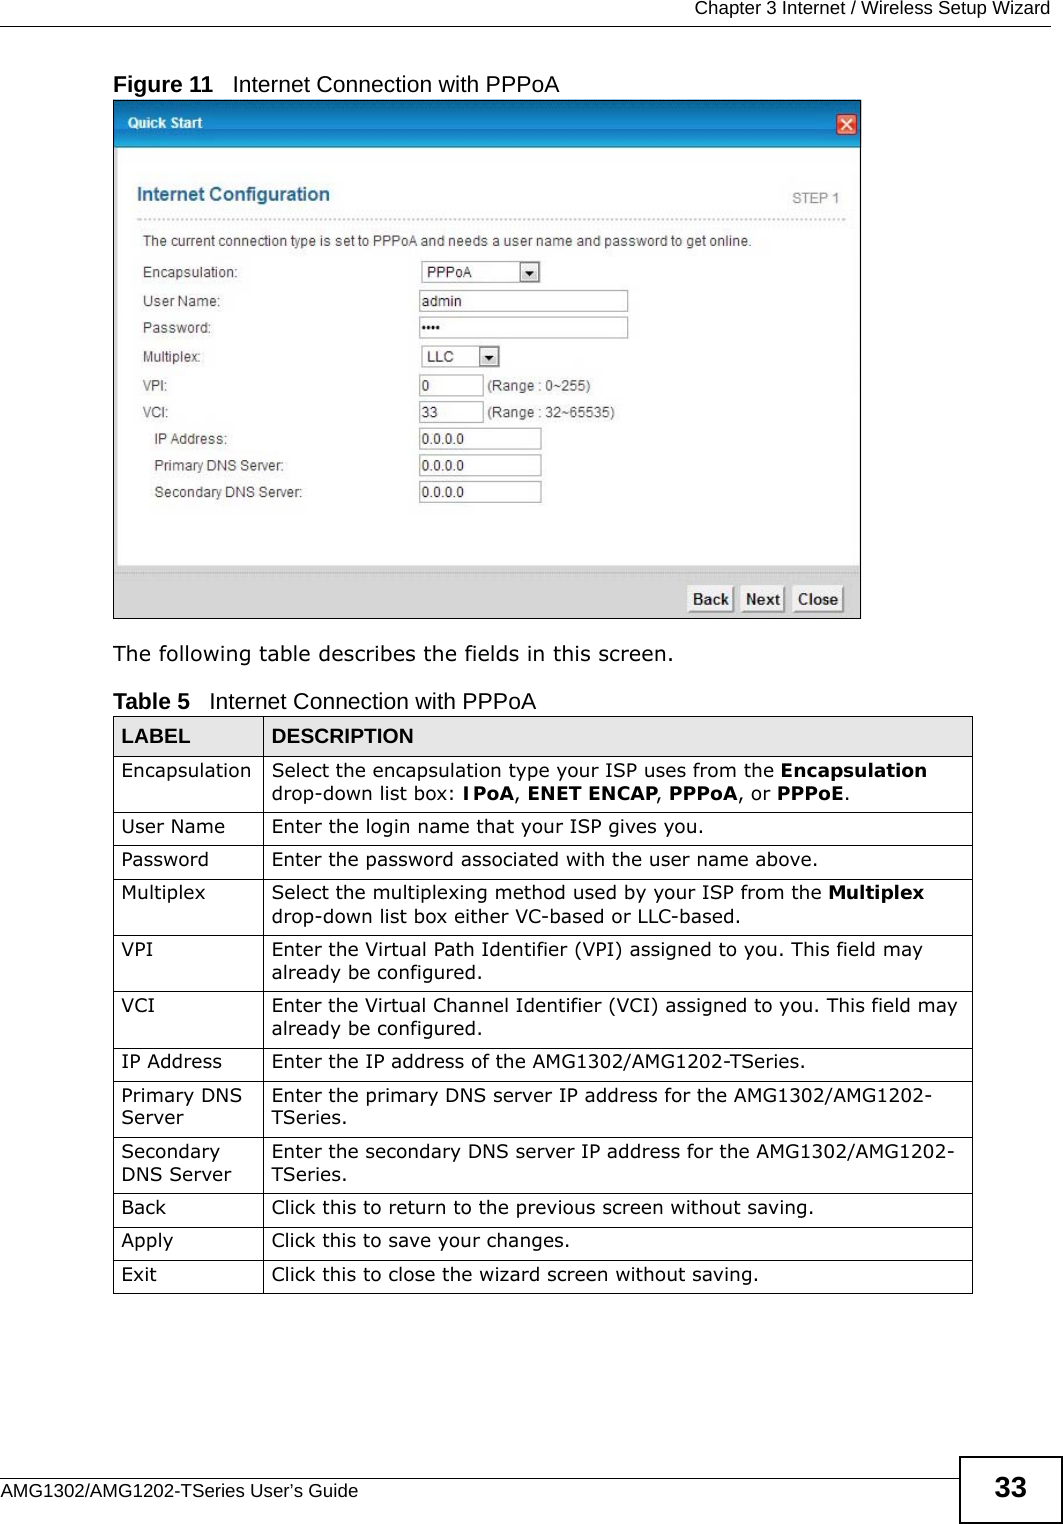  Chapter 3 Internet / Wireless Setup WizardAMG1302/AMG1202-TSeries User’s Guide 33Figure 11   Internet Connection with PPPoAThe following table describes the fields in this screen.Table 5   Internet Connection with PPPoALABEL DESCRIPTIONEncapsulation Select the encapsulation type your ISP uses from the Encapsulation drop-down list box: IPoA, ENET ENCAP, PPPoA, or PPPoE.User Name Enter the login name that your ISP gives you. Password Enter the password associated with the user name above.Multiplex Select the multiplexing method used by your ISP from the Multiplex drop-down list box either VC-based or LLC-based. VPI Enter the Virtual Path Identifier (VPI) assigned to you. This field may already be configured.VCI Enter the Virtual Channel Identifier (VCI) assigned to you. This field may already be configured.IP Address Enter the IP address of the AMG1302/AMG1202-TSeries. Primary DNS ServerEnter the primary DNS server IP address for the AMG1302/AMG1202-TSeries.Secondary DNS ServerEnter the secondary DNS server IP address for the AMG1302/AMG1202-TSeries.Back Click this to return to the previous screen without saving.Apply Click this to save your changes.Exit Click this to close the wizard screen without saving.